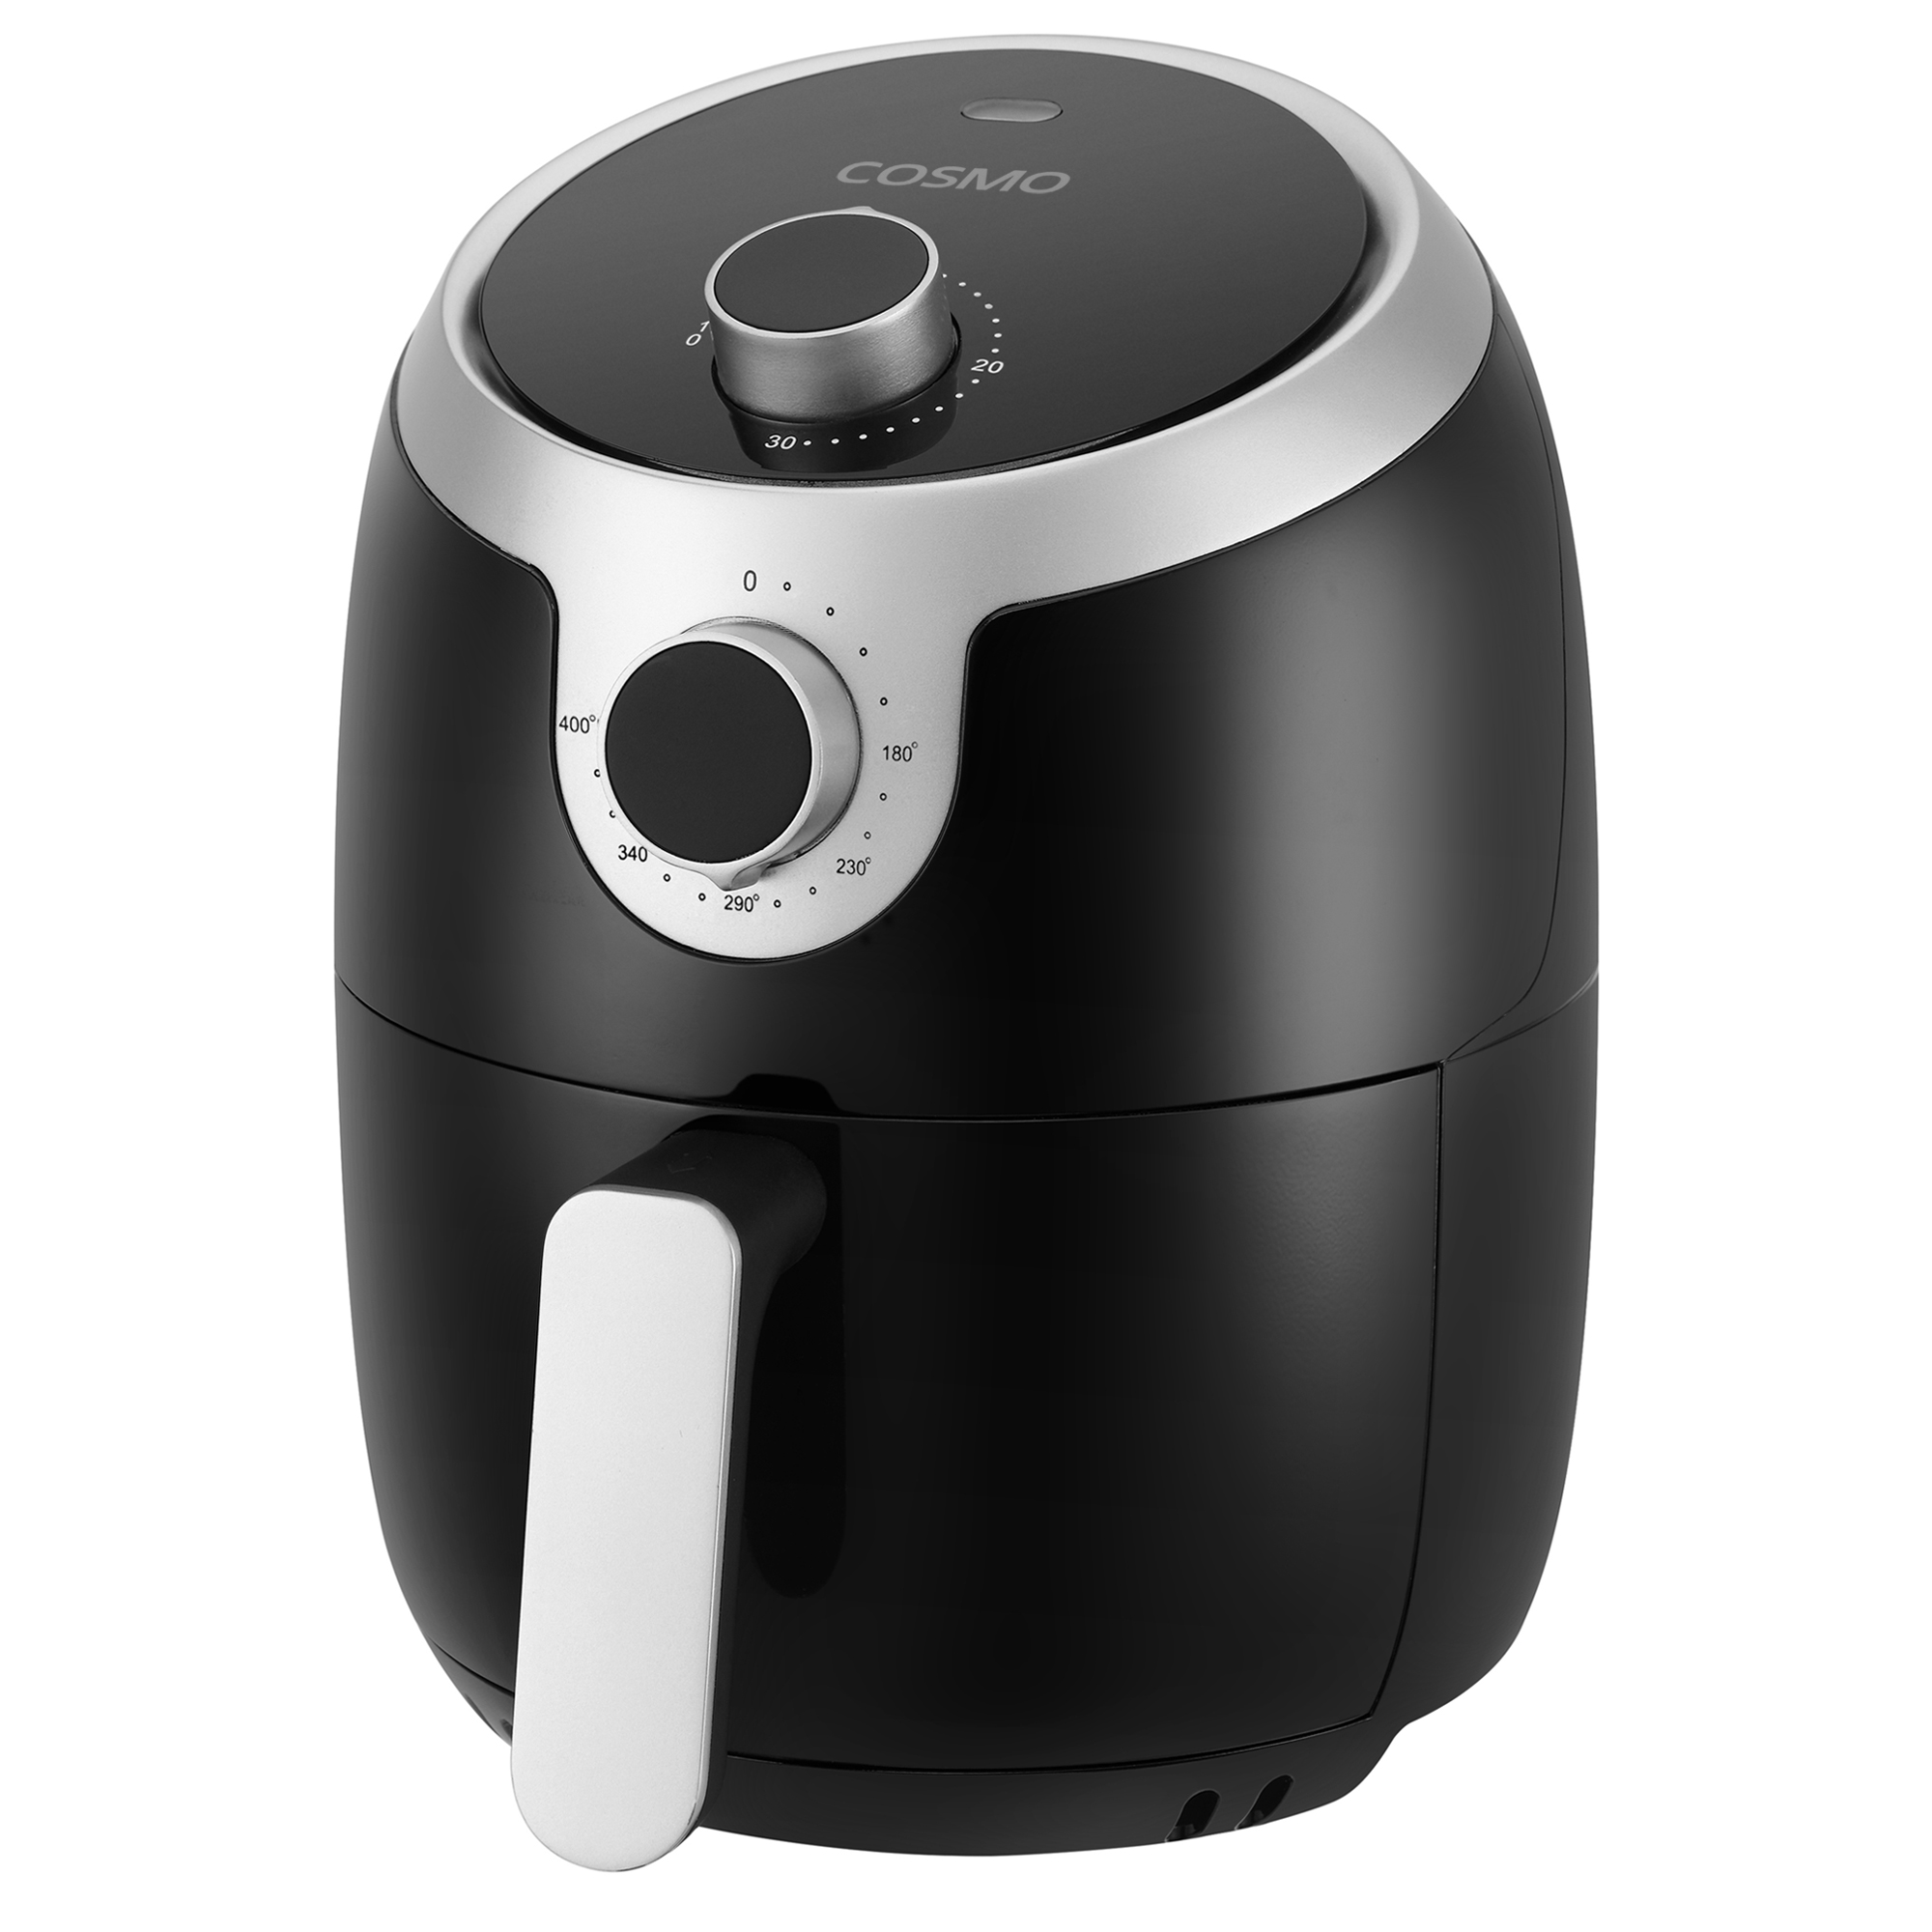 oil-free air fryer Air Fryer 2 Quart, Small Compact Air Fryer, with  Adjustable Temp Control